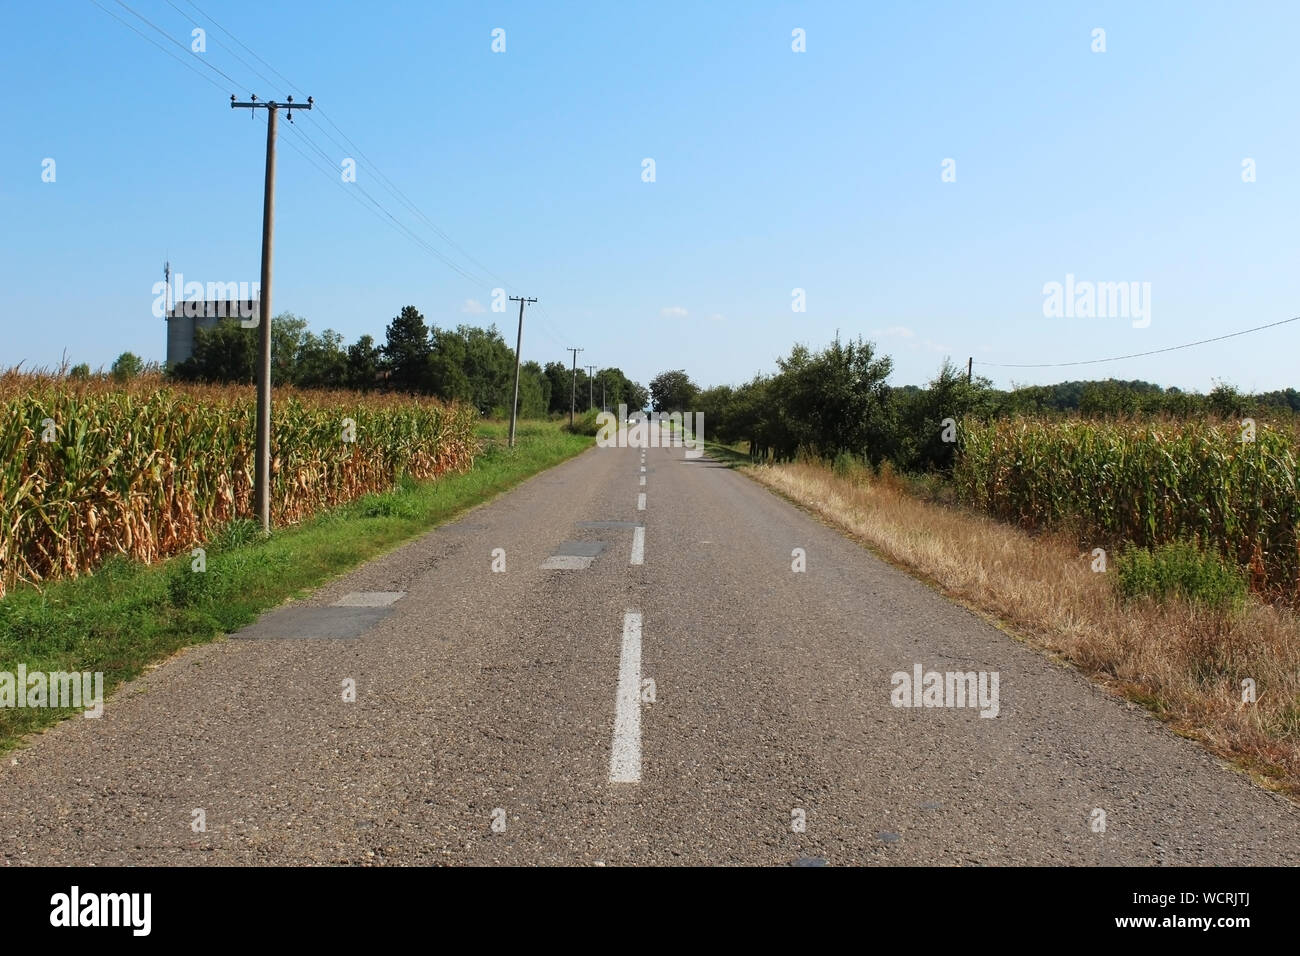 Rural straight paved road between green meadows and trees in summer (central perspective) Stock Photo